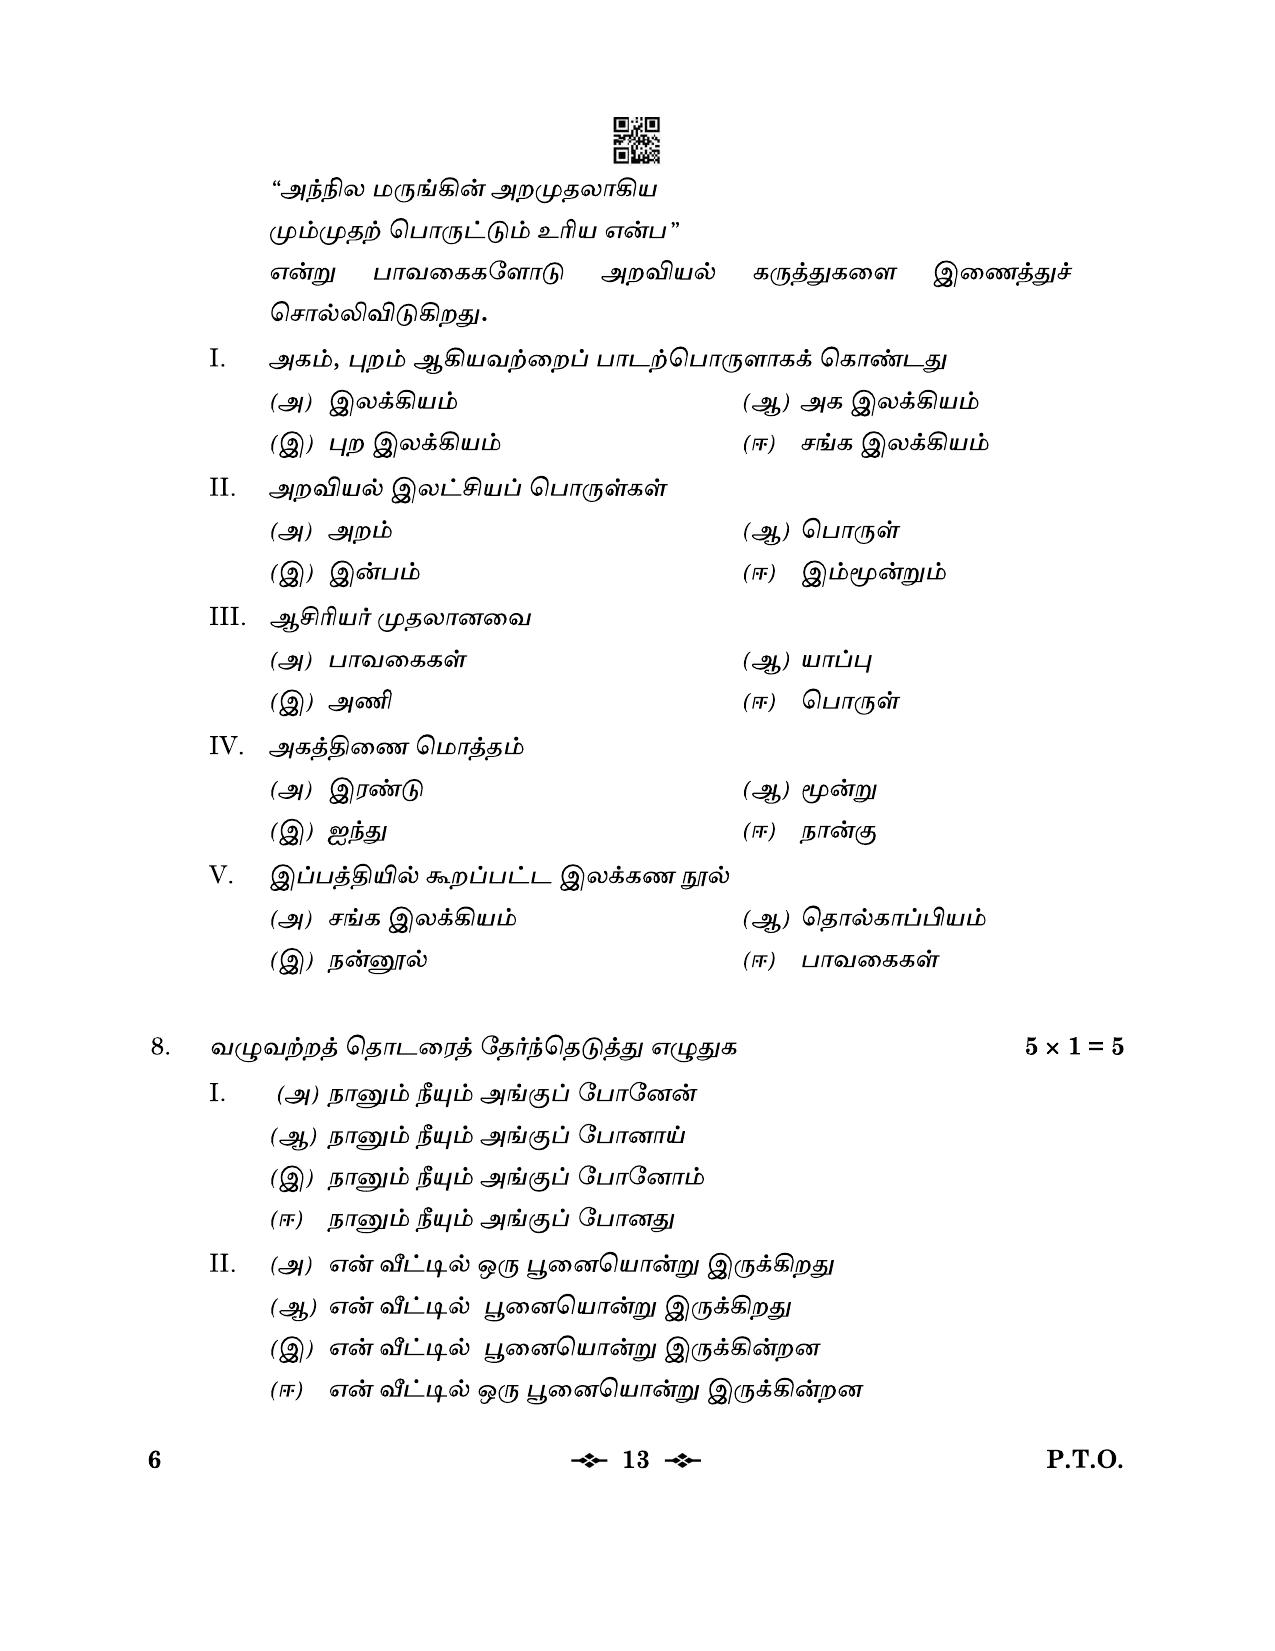 CBSE Class 12 6_Tamil 2023 Question Paper - Page 13